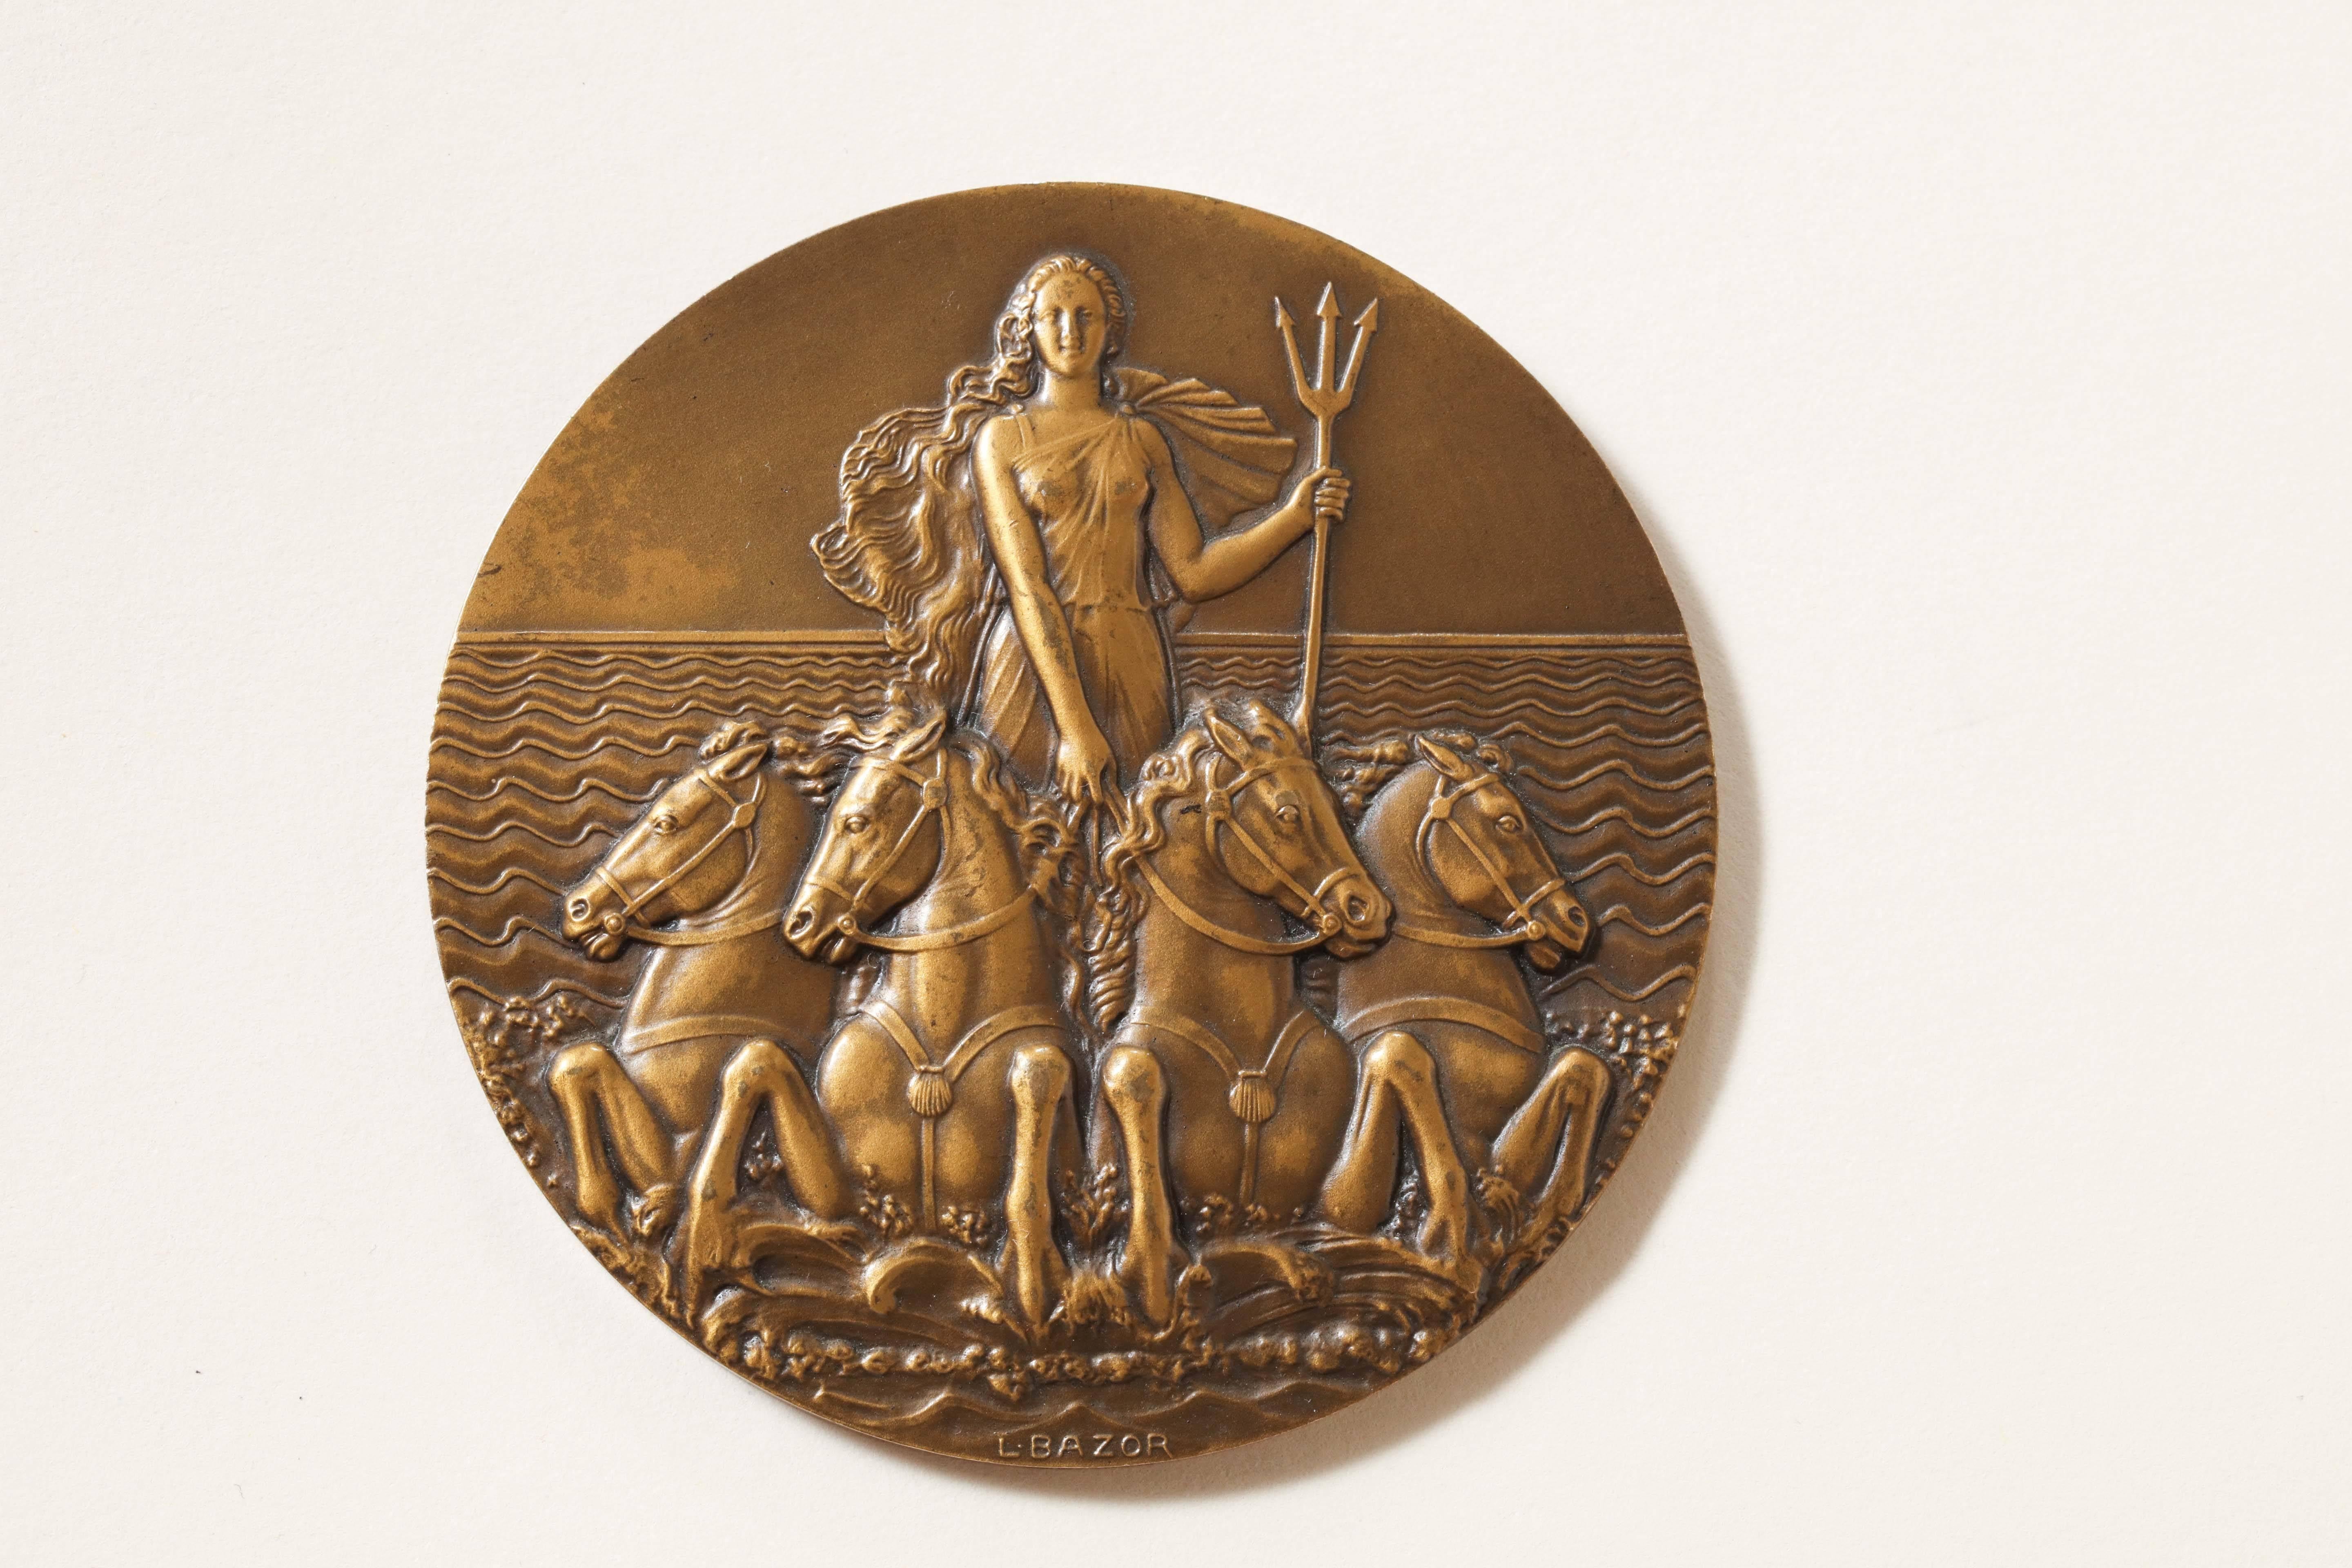 French Art Deco bronze medal commemorating the SS L'ATLANTIQUE, 1931.
This is one of the rarest of the ship medals.
By Lucien Bazor who was the Chief Engraver at the Paris mint from 1930-1958.

Obverse: Venus holding a trident and riding a four